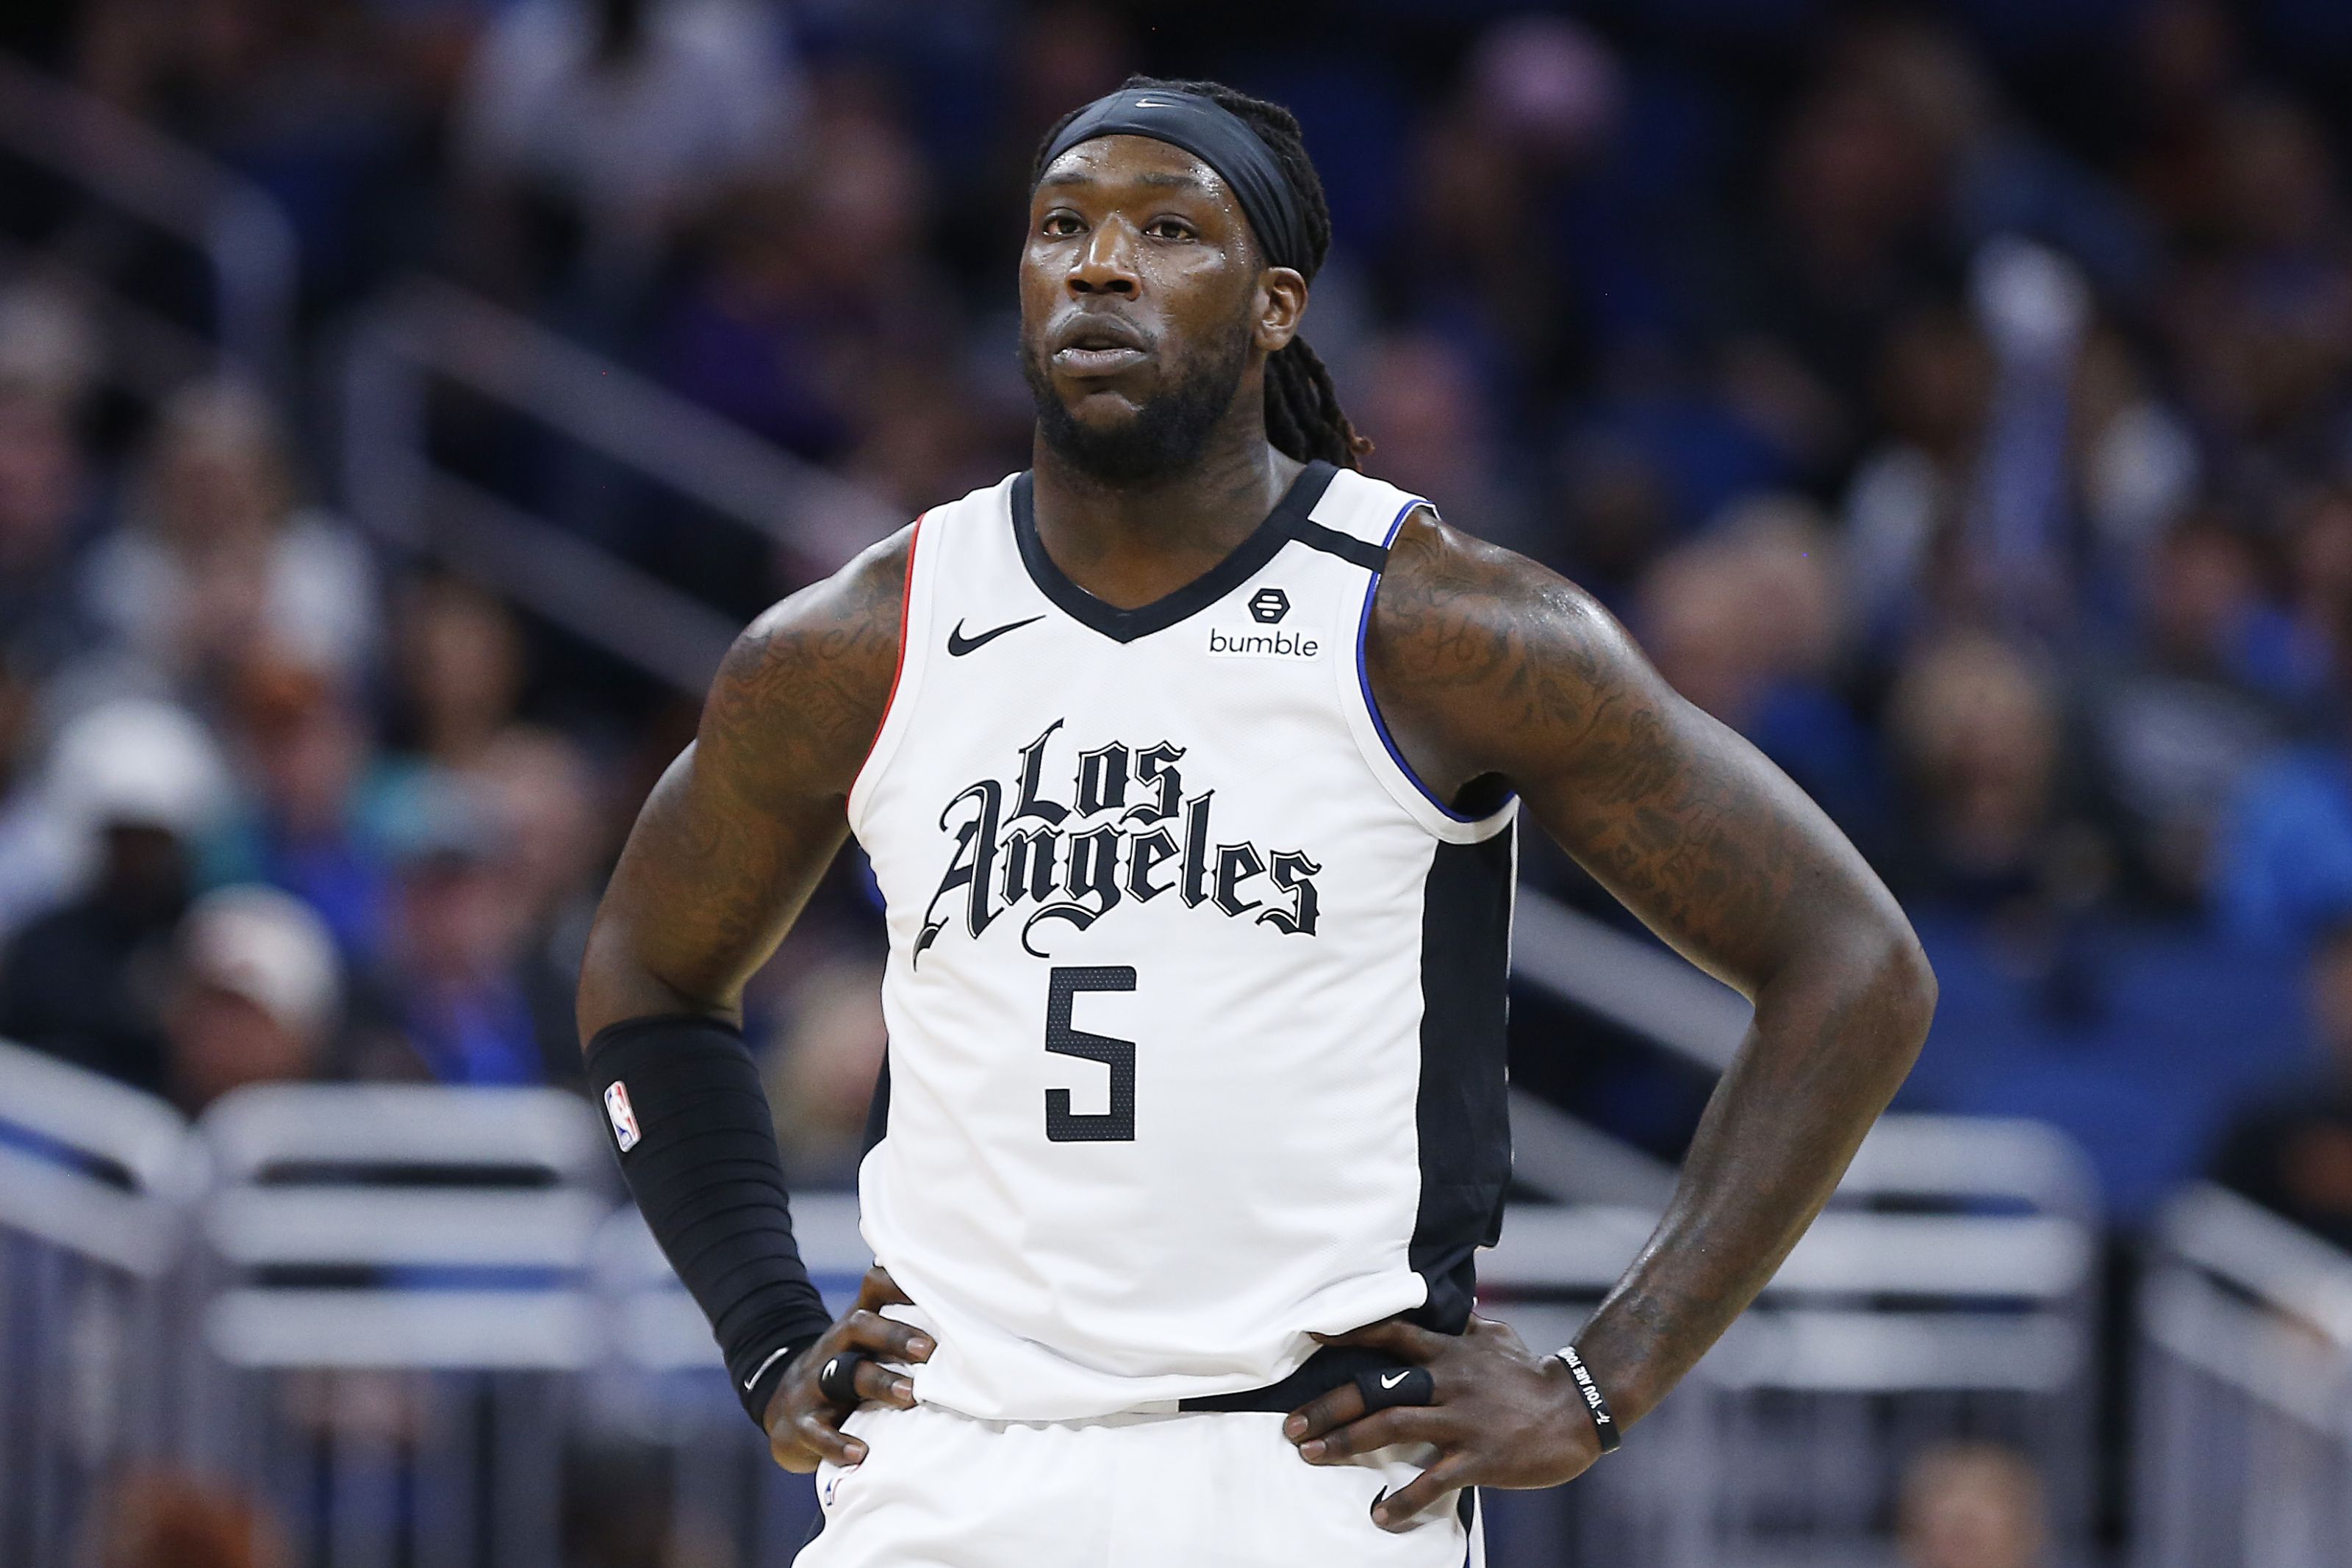 Can Montrezl Harrell live up to a heftier contract after free agency?